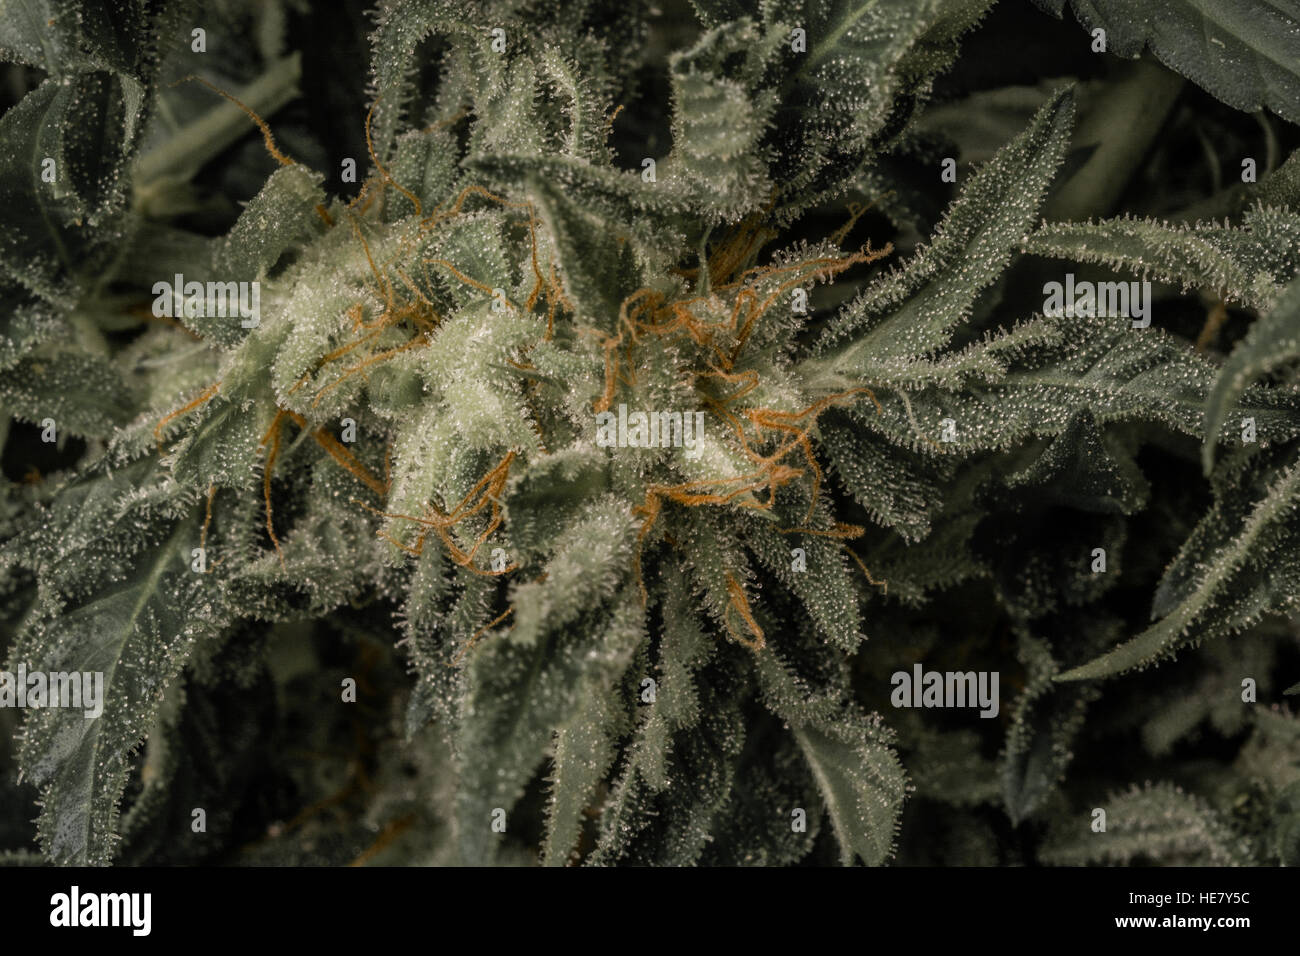 Cannabis, skunk, weed, home-grown, dope, grass, super-weed Stock Photo